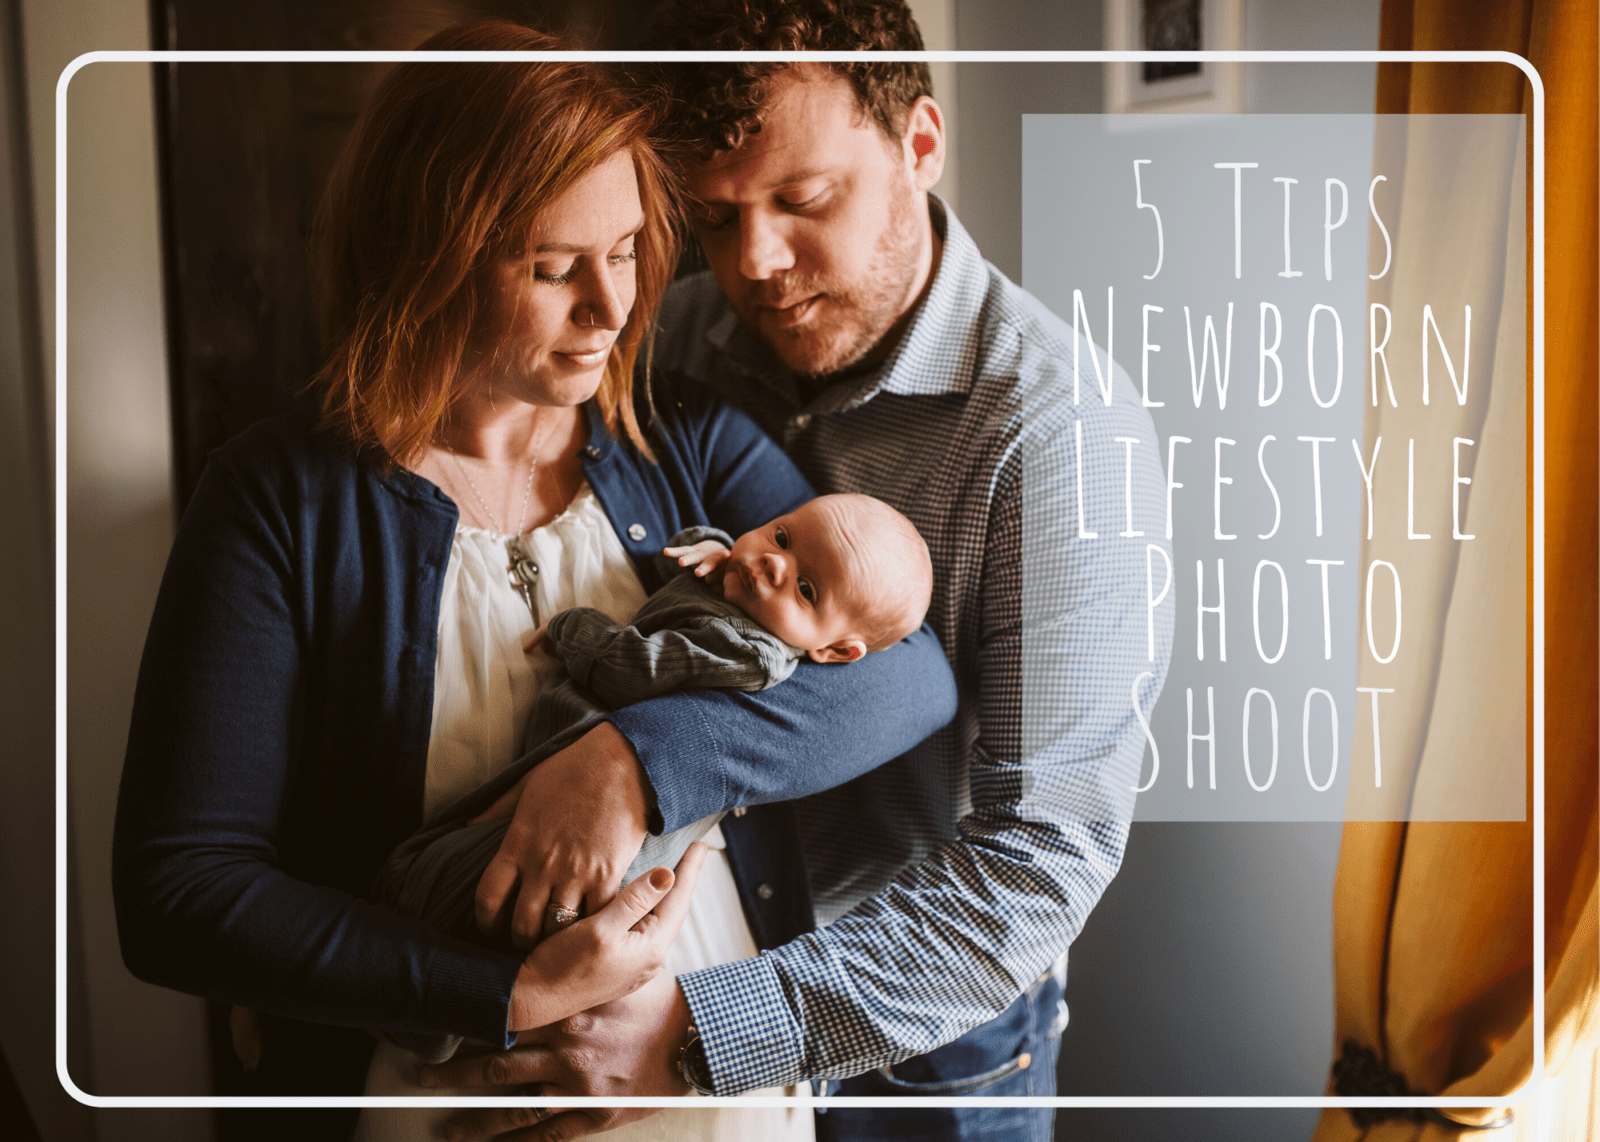 You are currently viewing 5 Tips for an Amazing Newborn Lifestyle Photo Shoot